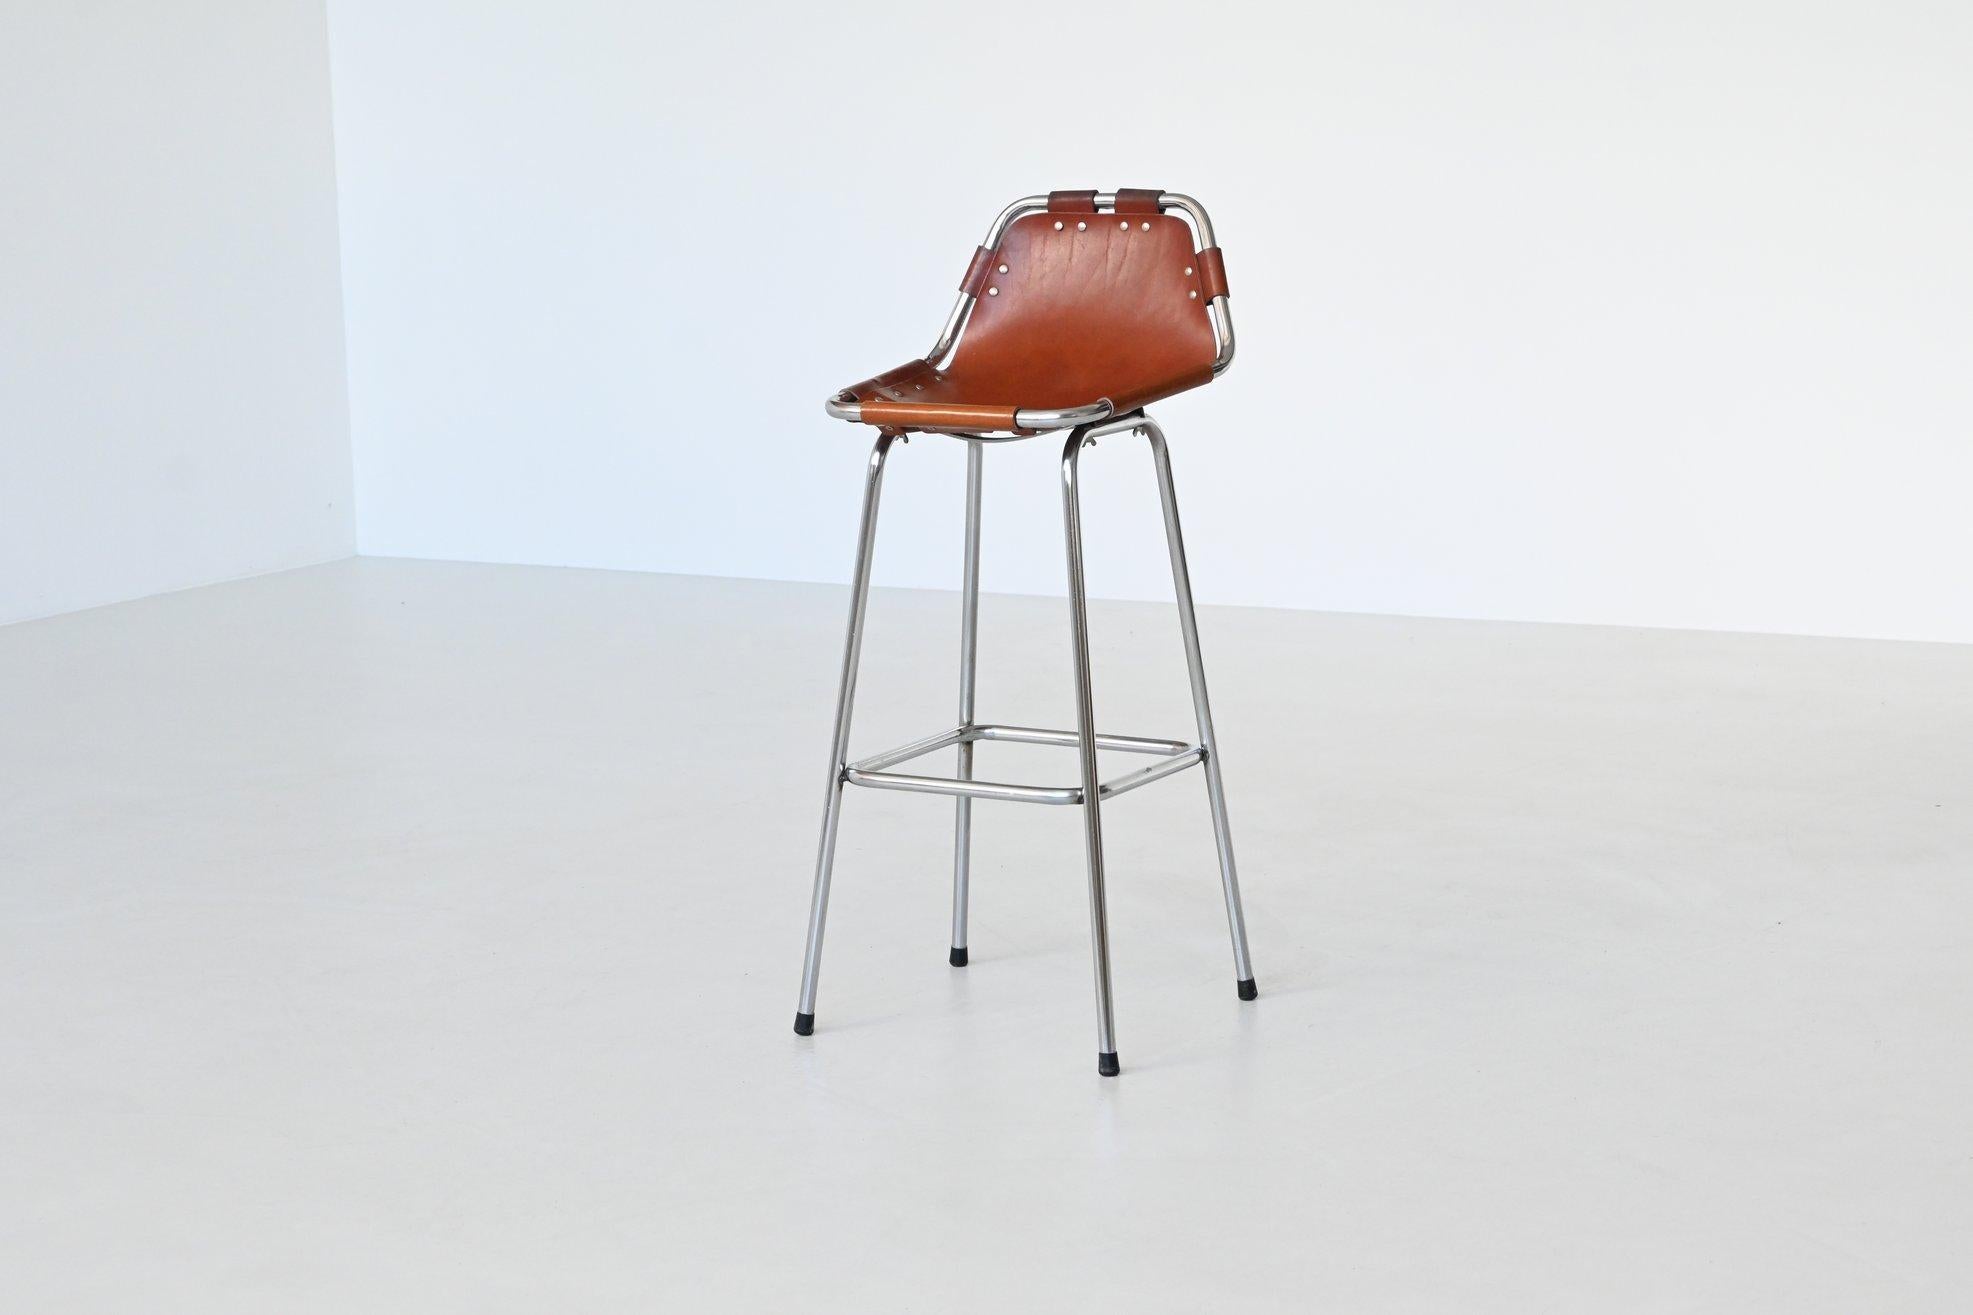 Mid-20th Century Bar stool selected by Charlotte Perriand for Les Arcs Ski Resort France 1960